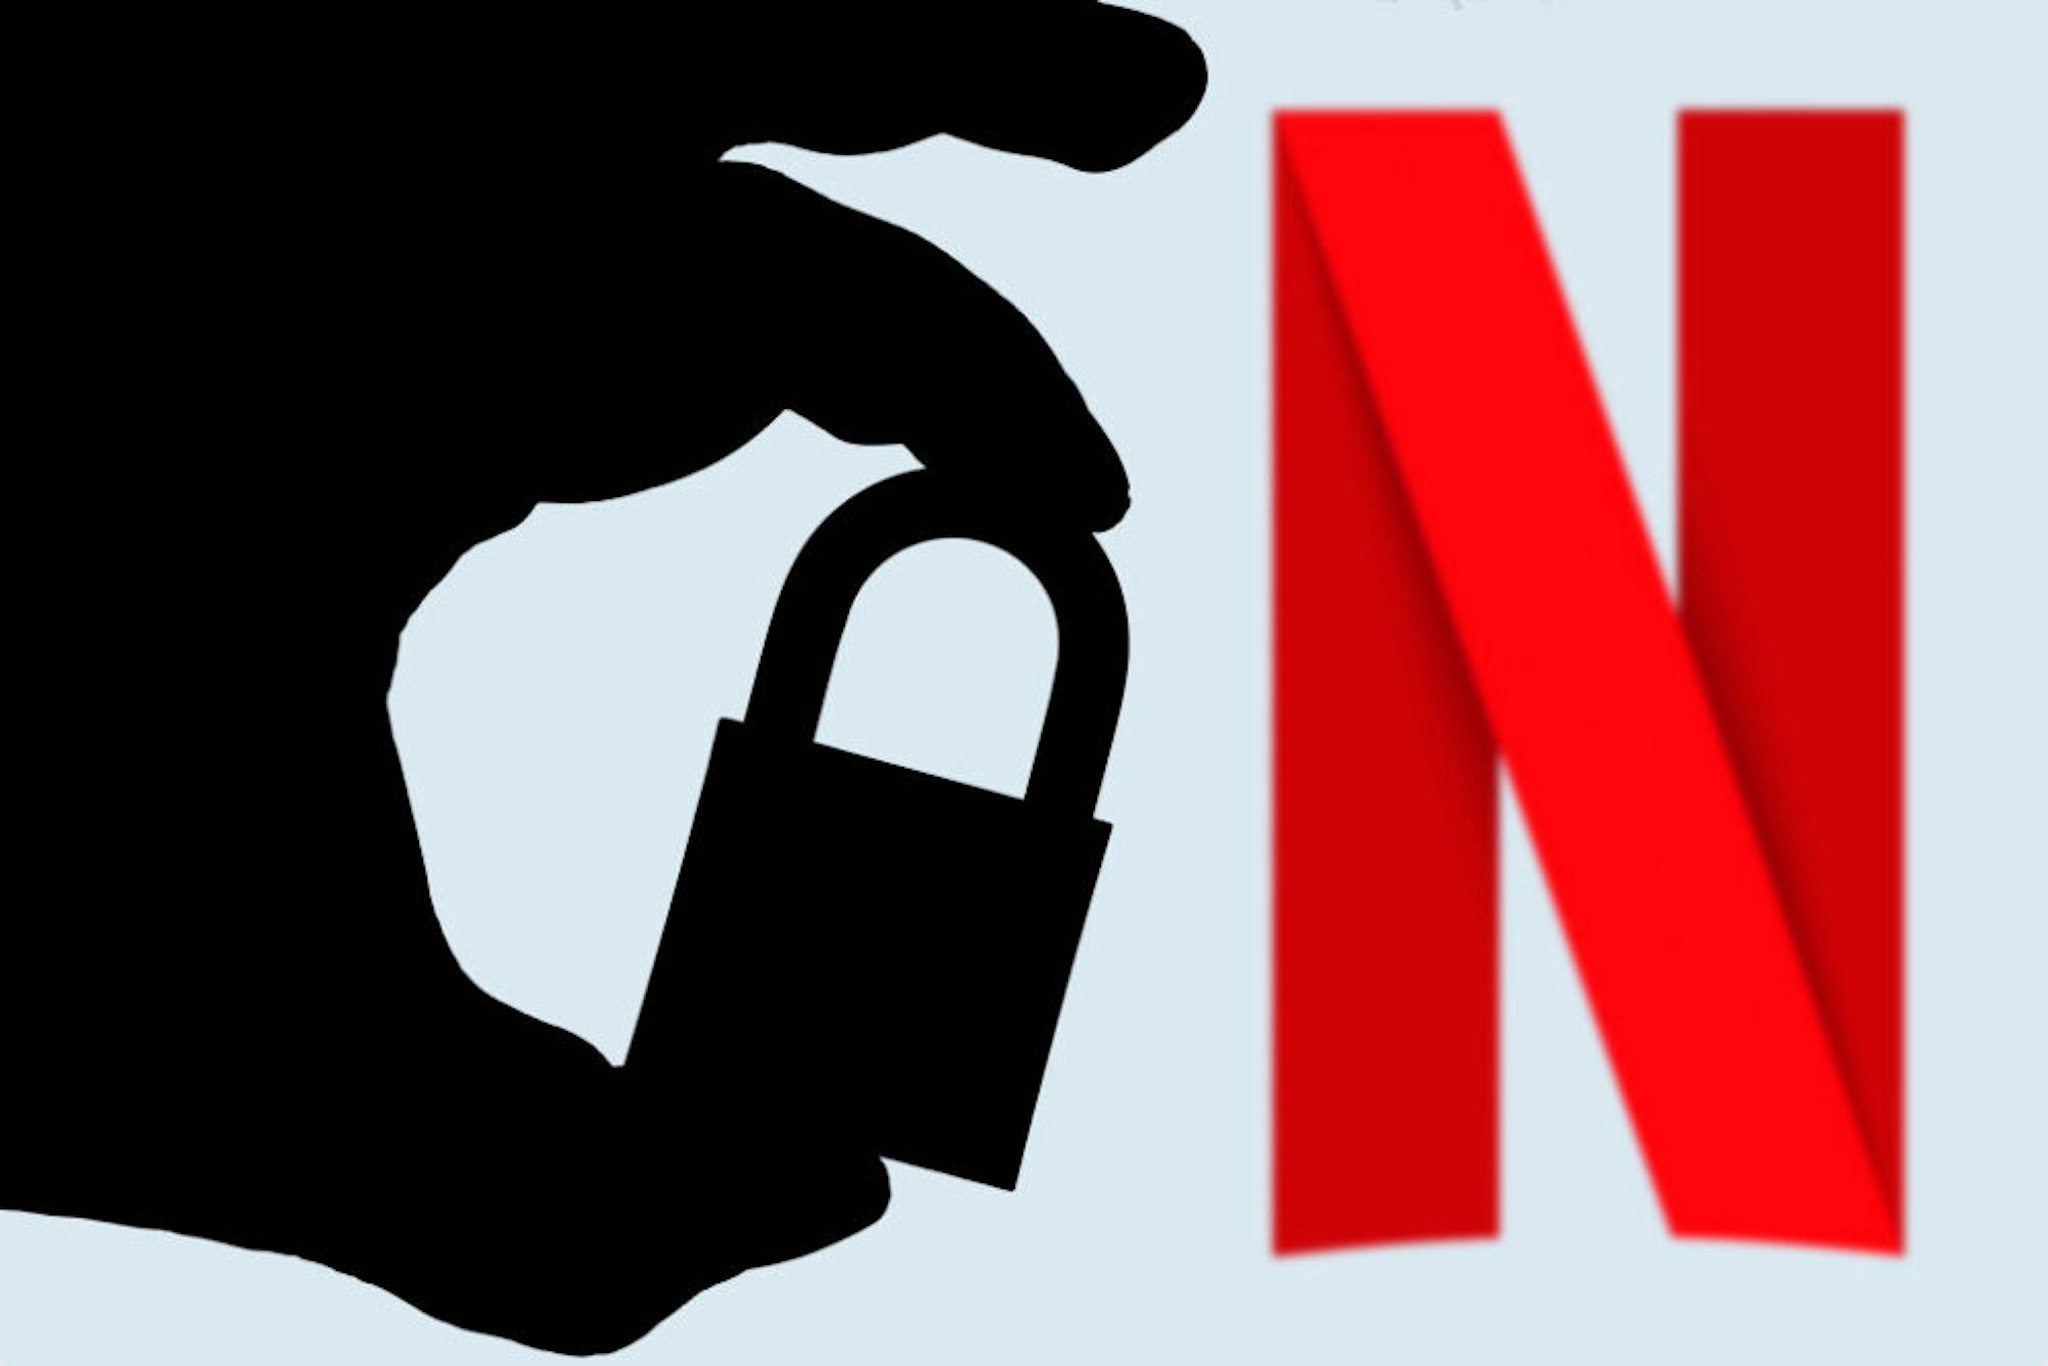 BRAZIL - 2021/05/03: In this photo illustration a hand seen holding a padlock and in the background the logo of Netflix on the computer screen. Online data protection - breach concept. Internet privacy issues.